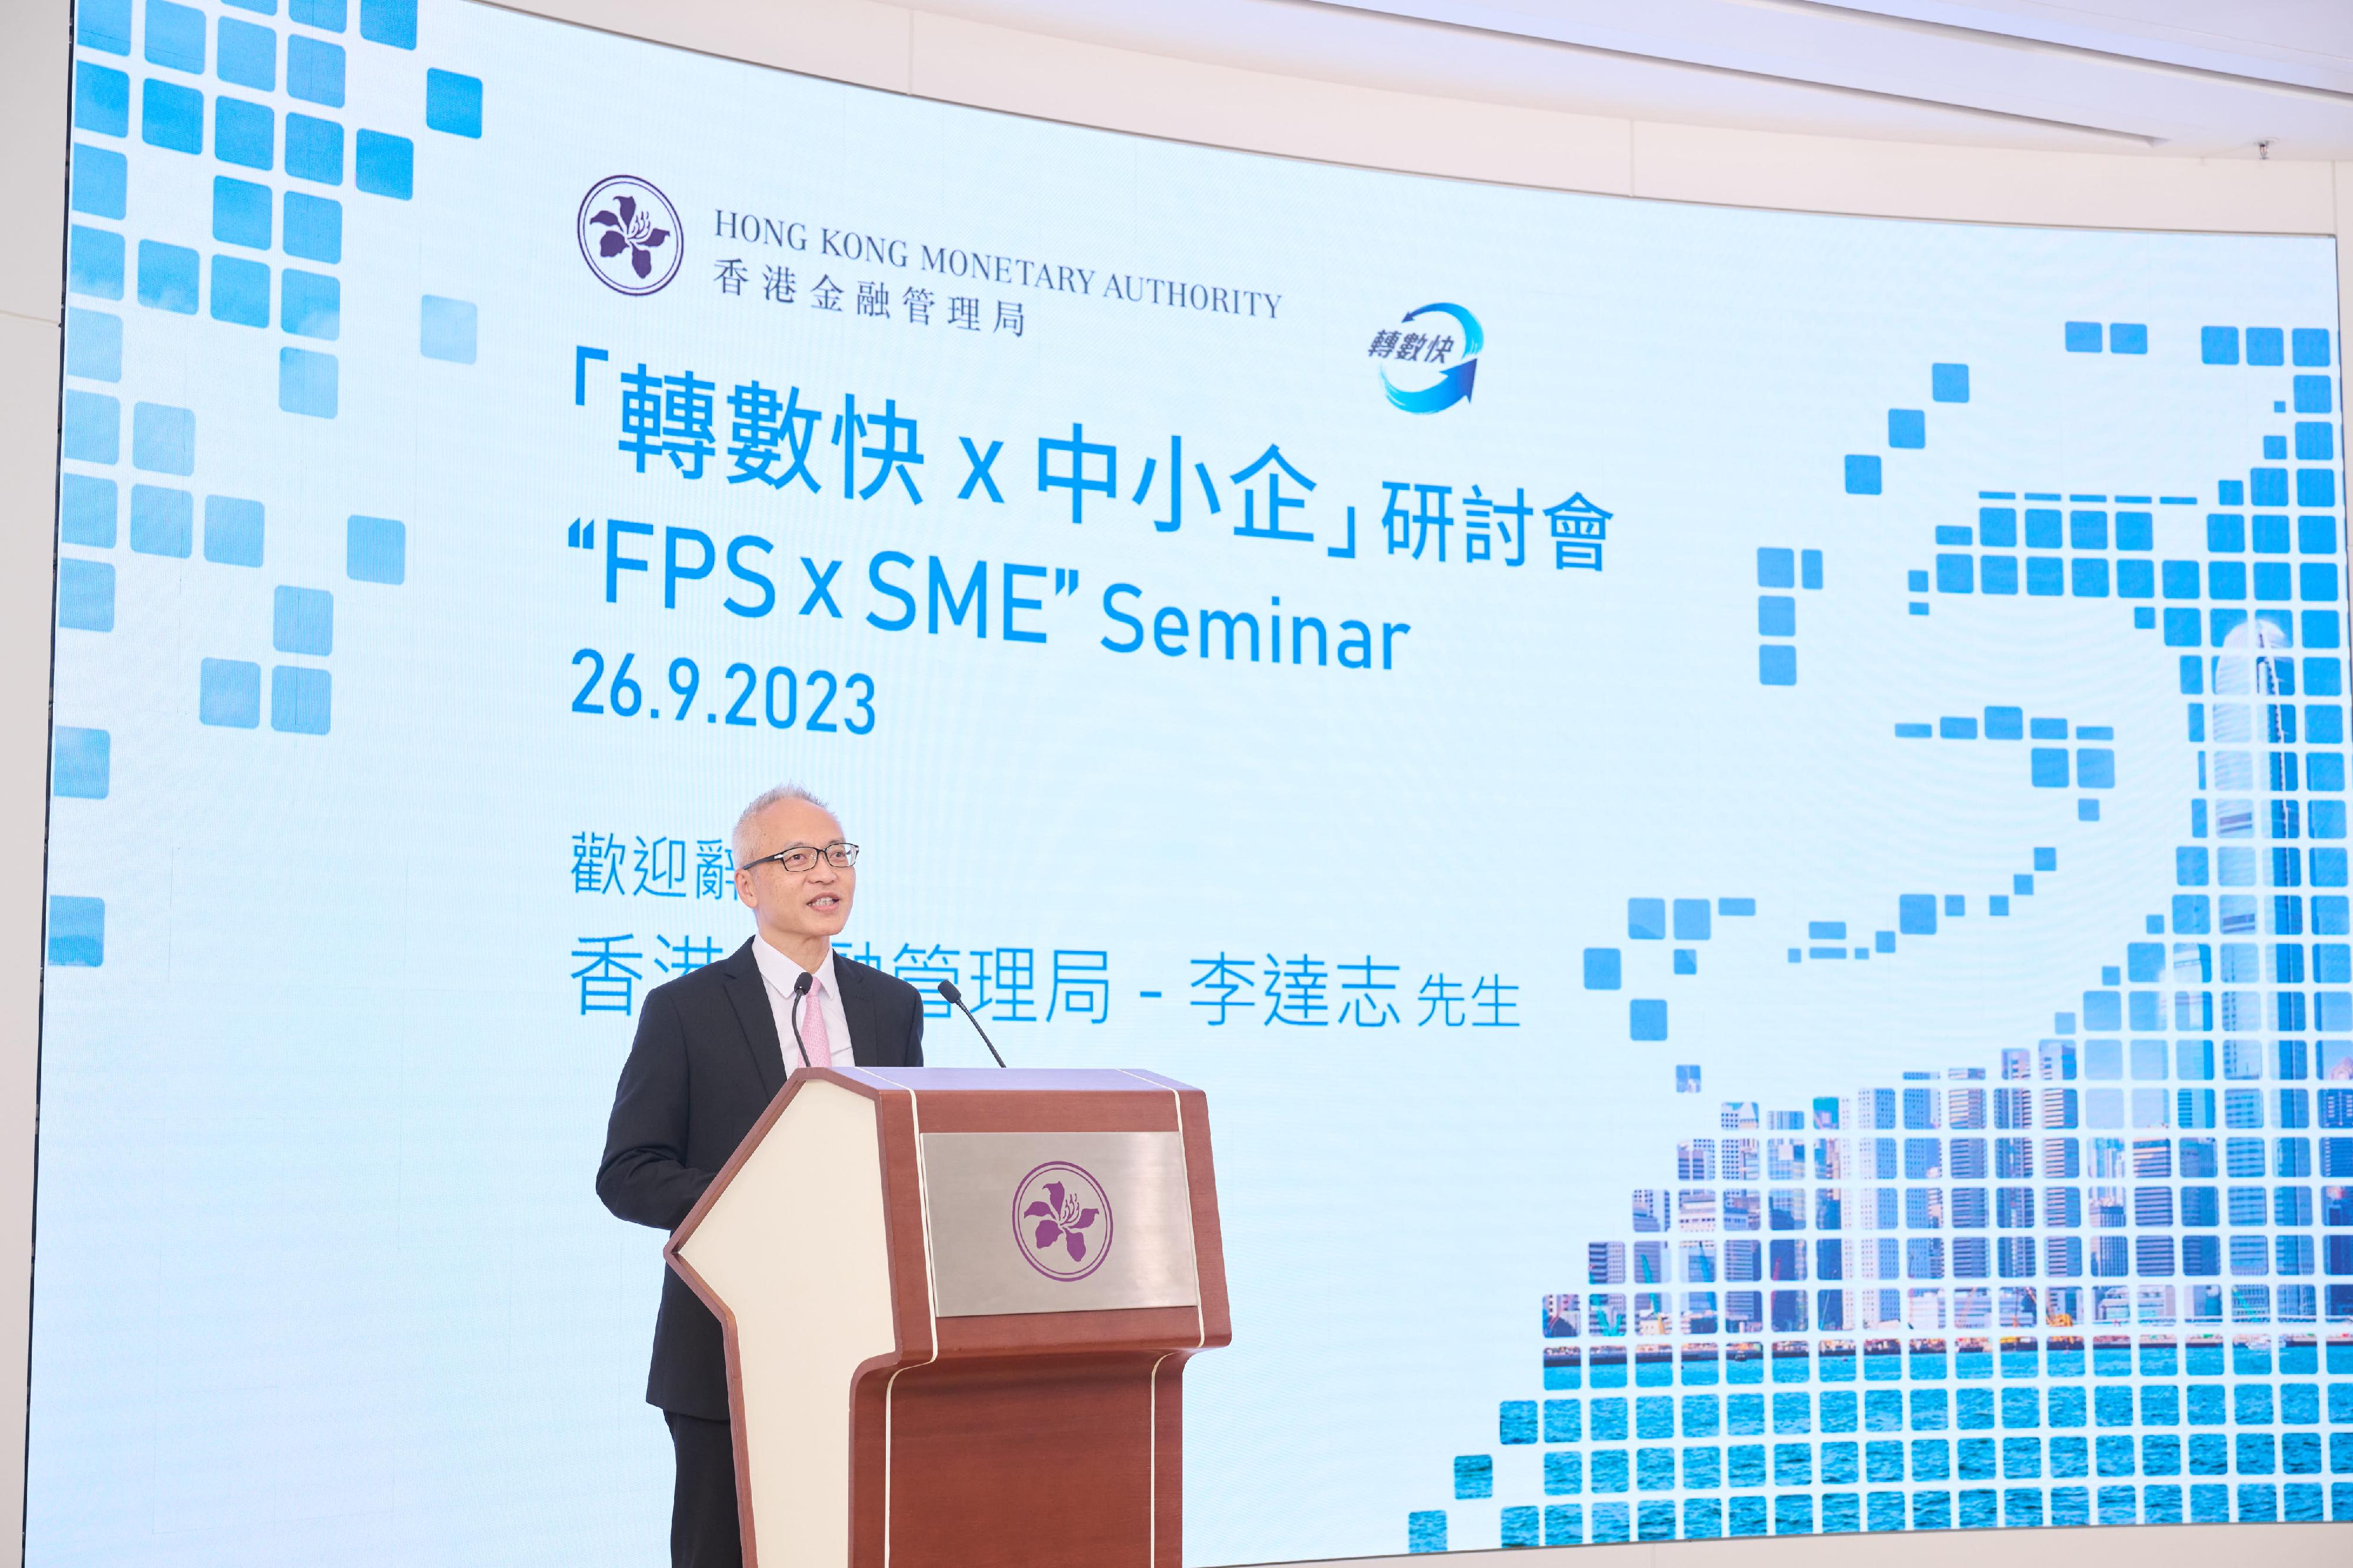 Deputy Chief Executive of the Hong Kong Monetary Authority Mr Howard Lee delivers welcome remarks at the "FPS x SME" Seminar today (September 26).